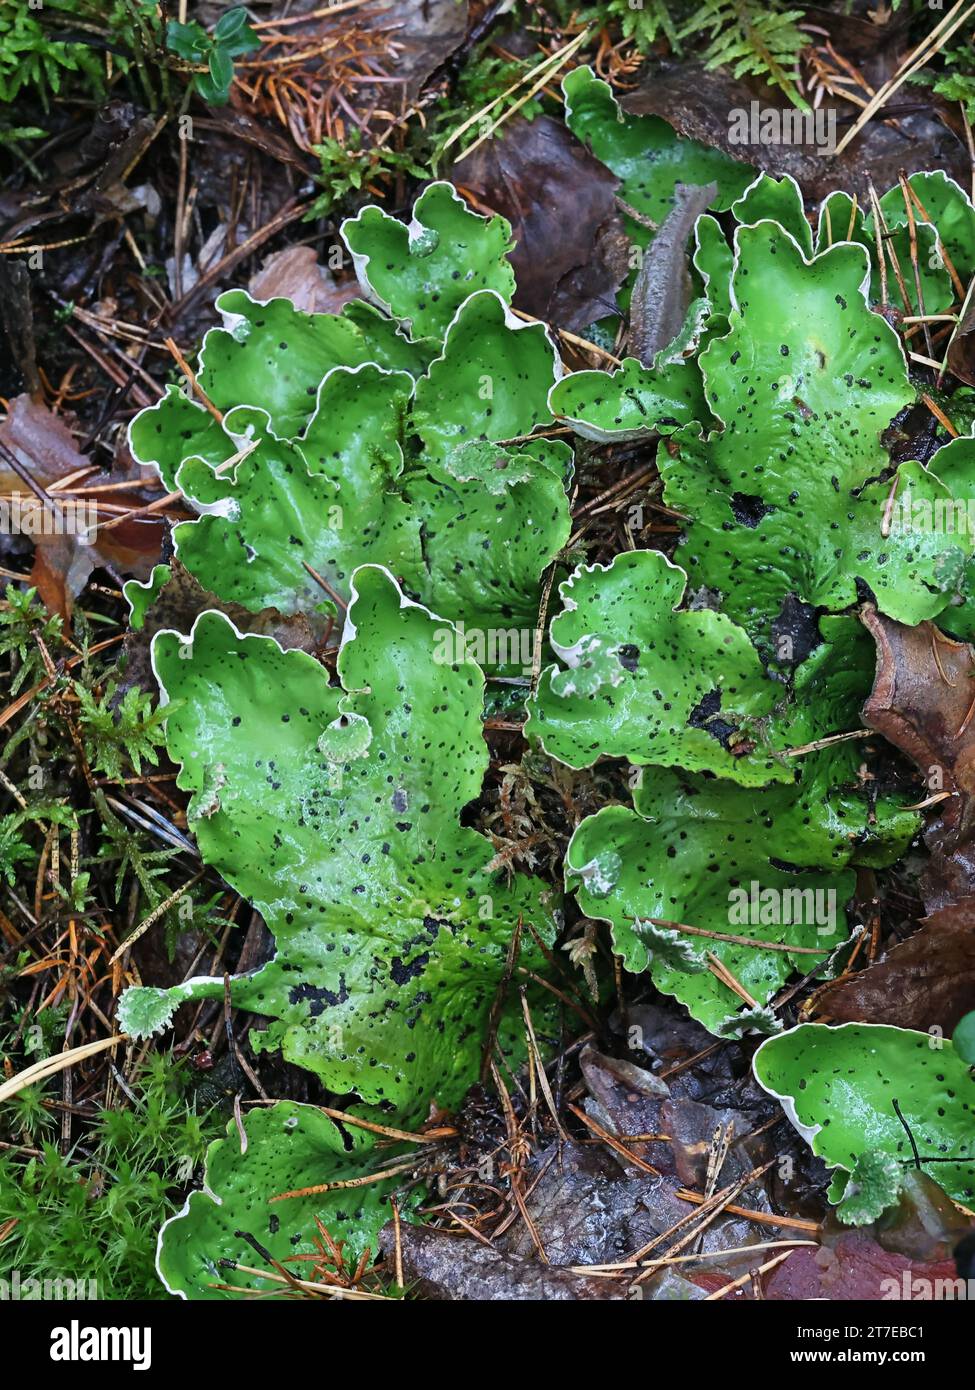 Peltigera aphthosa, known as dog lichen, leafy lichen, felt lichen, and common freckle pelt, lichens from Finland Stock Photo